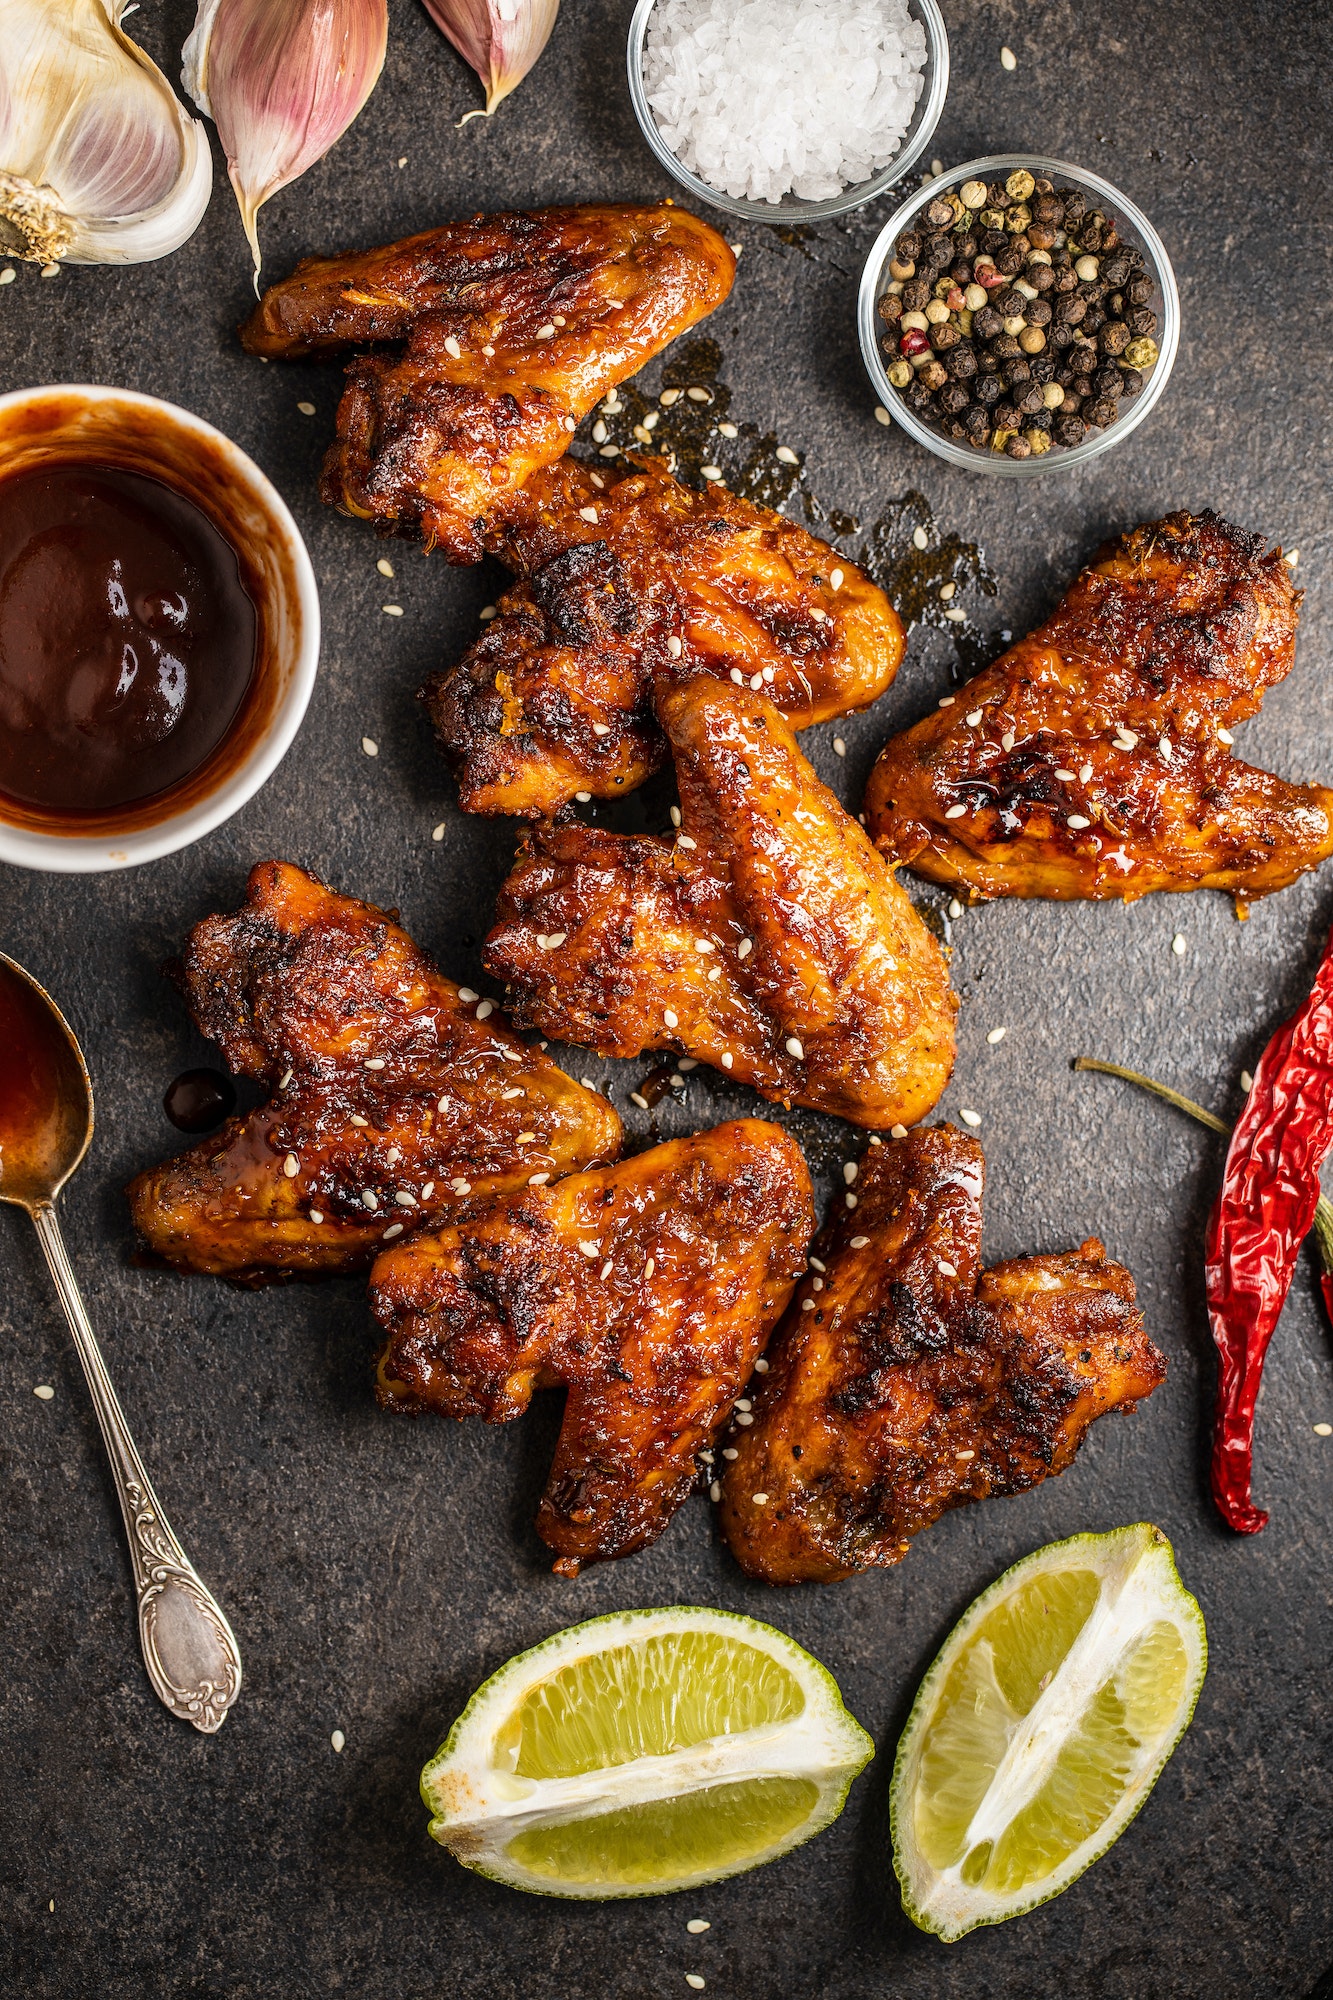 Grilled chicken wings.